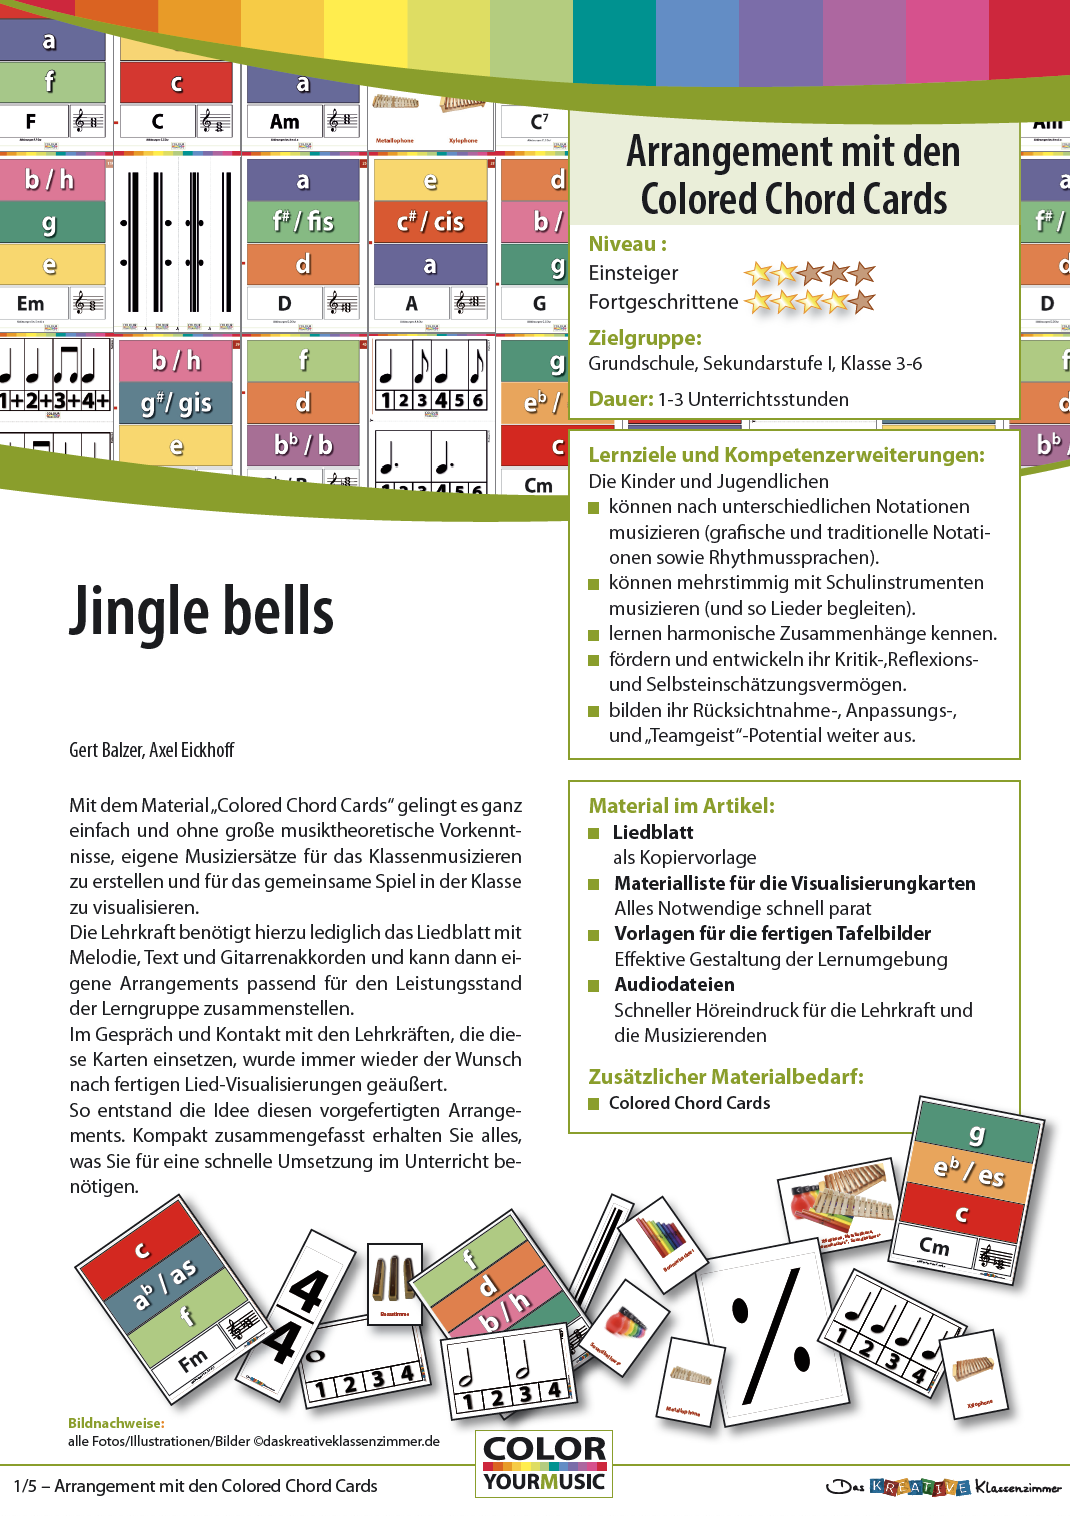 Jingle bells - Colored Chord Cards